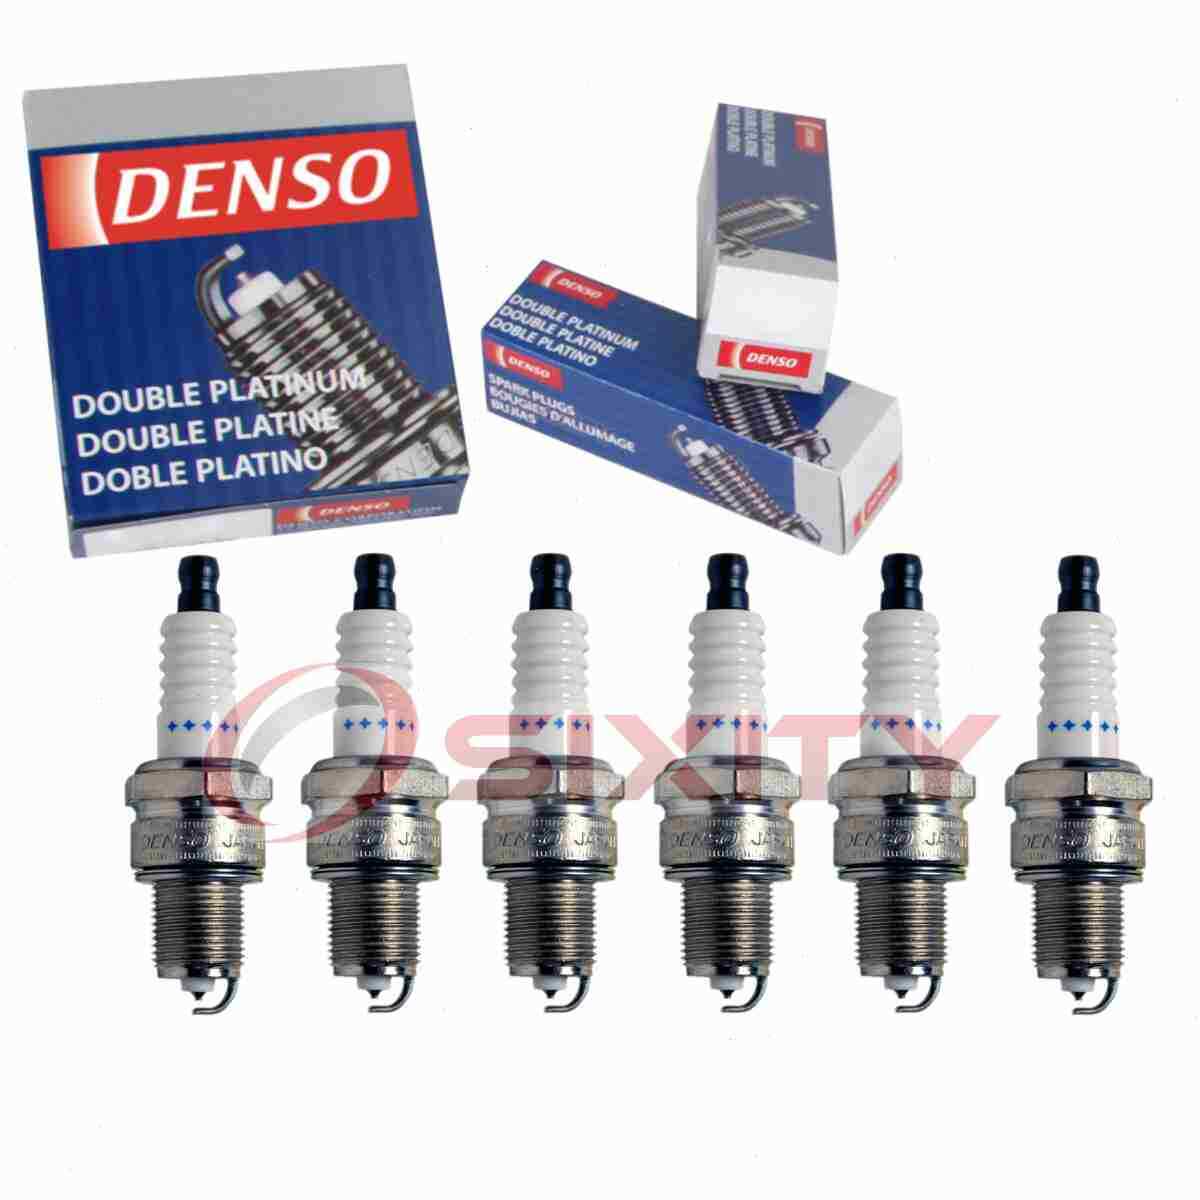 6 pc Denso Platinum Long Life Spark Plugs for 1961-1966 Chevrolet P30 Series cp